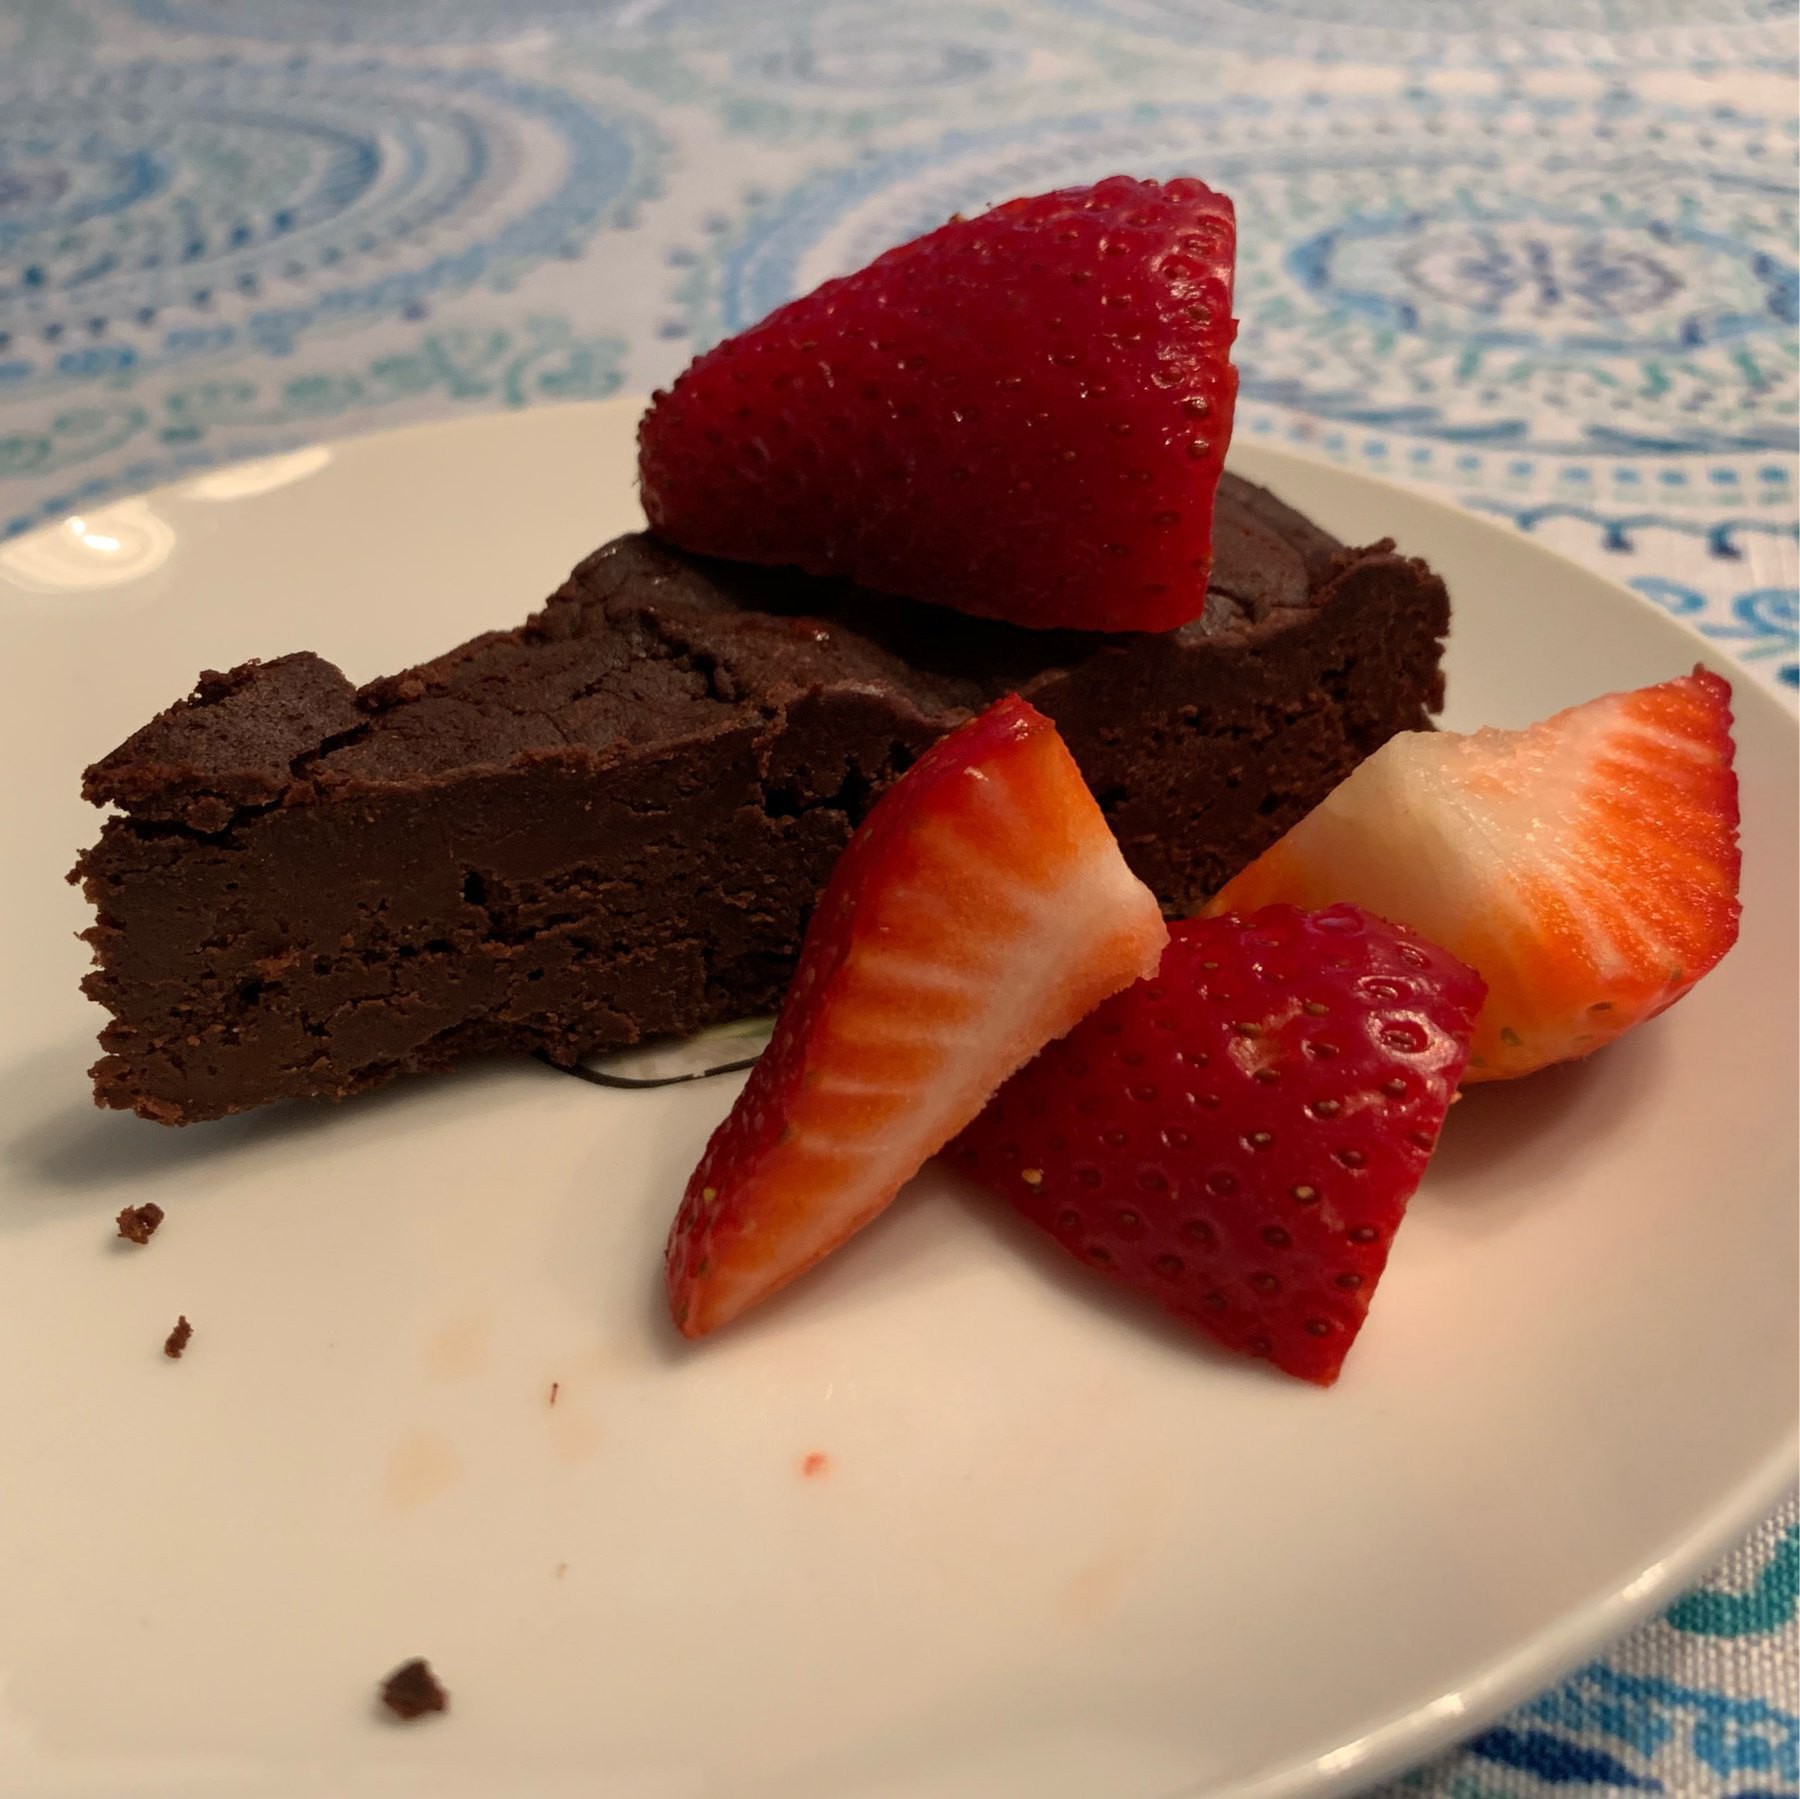 Slice of chocolate torte on a plate, garnished with strawberry quarters